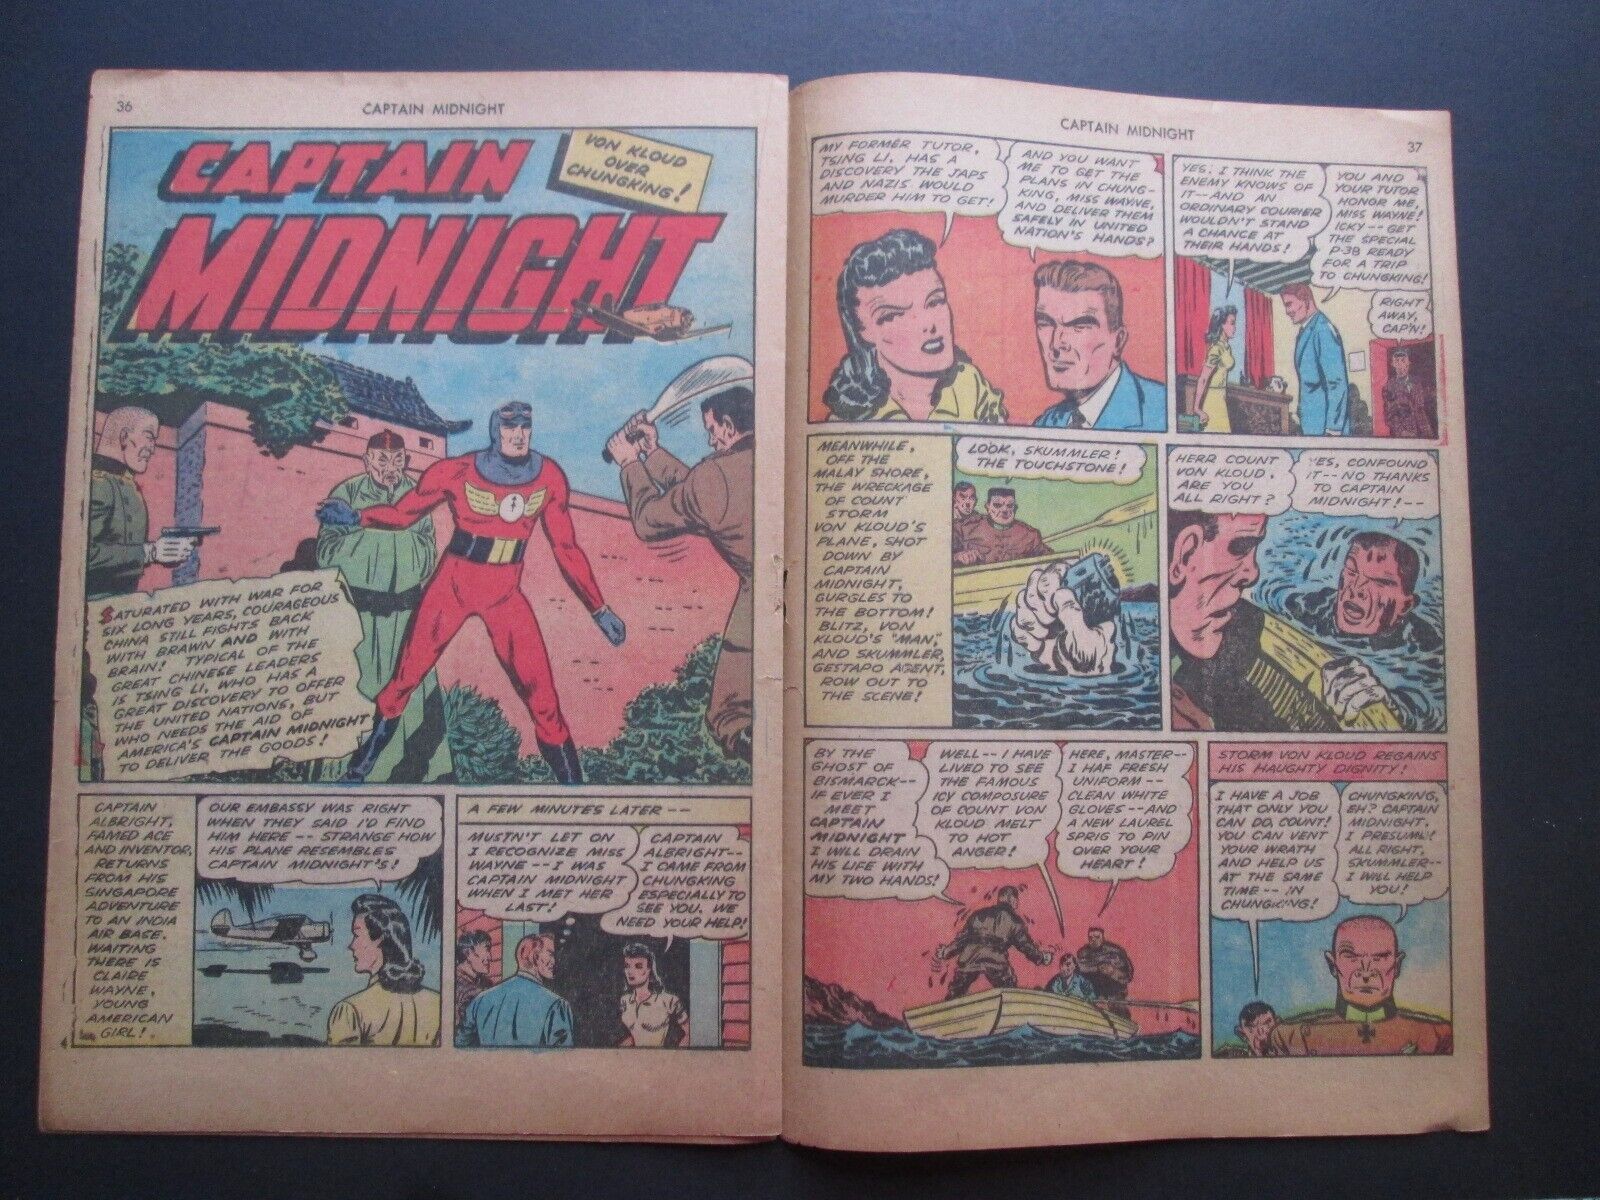 CENTER 8 PAGES ONLY! Captain Midnight 14 November 1943 Golden Age Trash or Art!